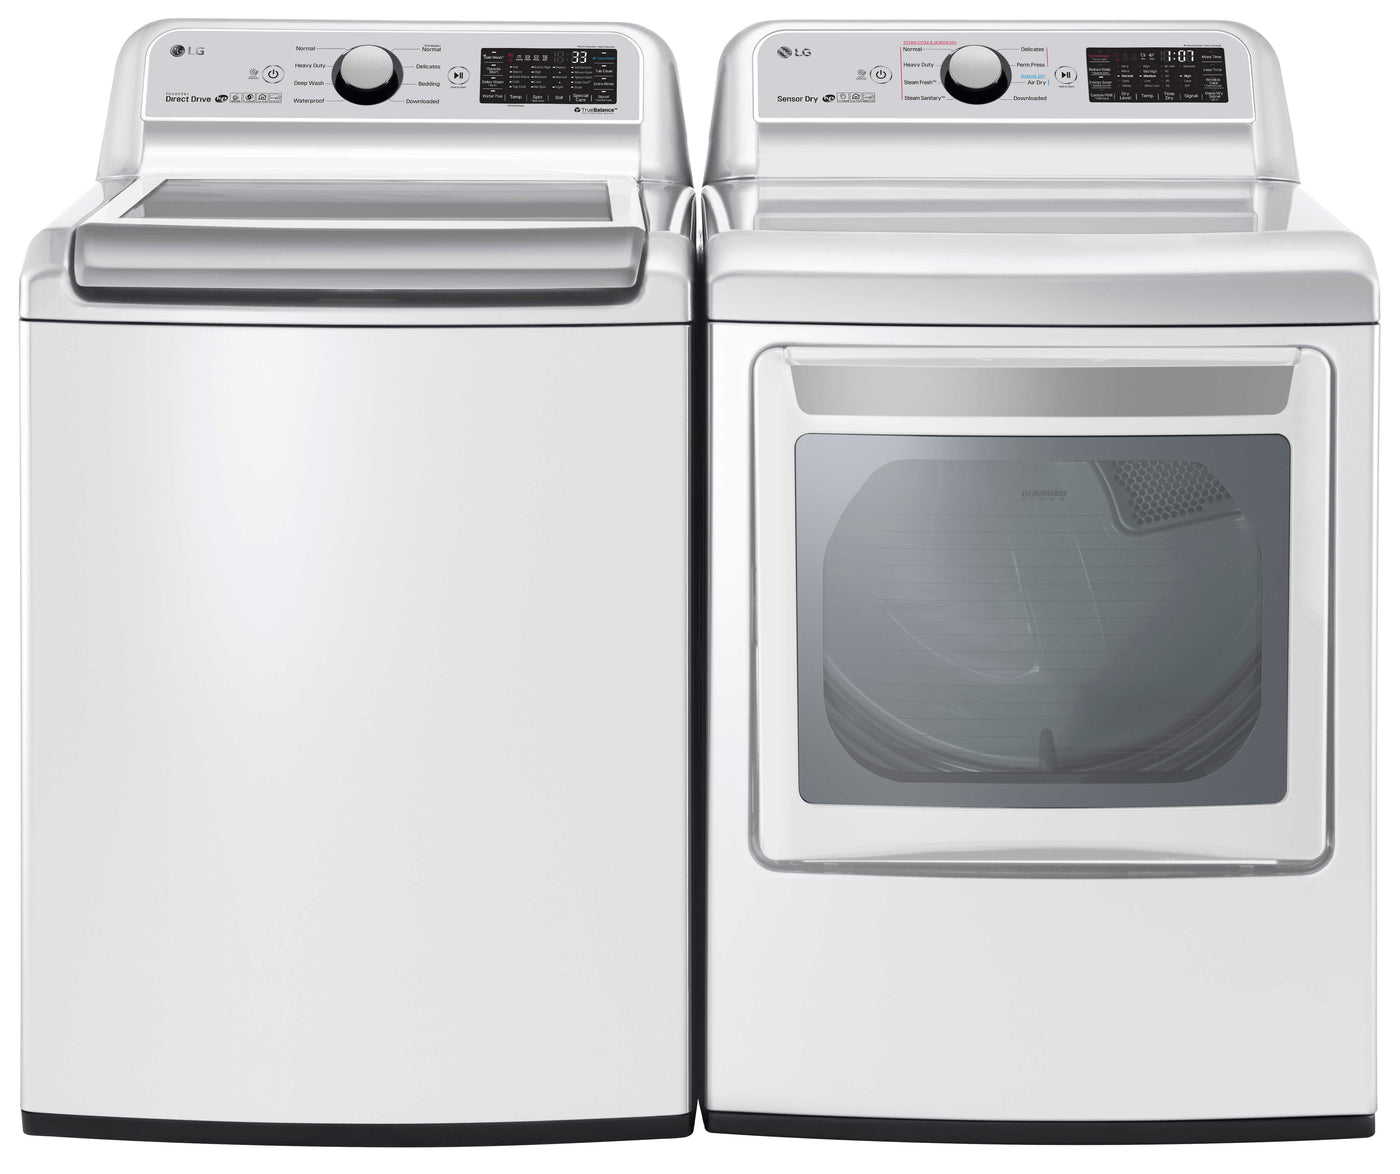 LG White Top-Load Washer (5.8 cu. ft.) & Electric Dryer (7.3 cu. ft.) - WT7300CW/DLEX7250W